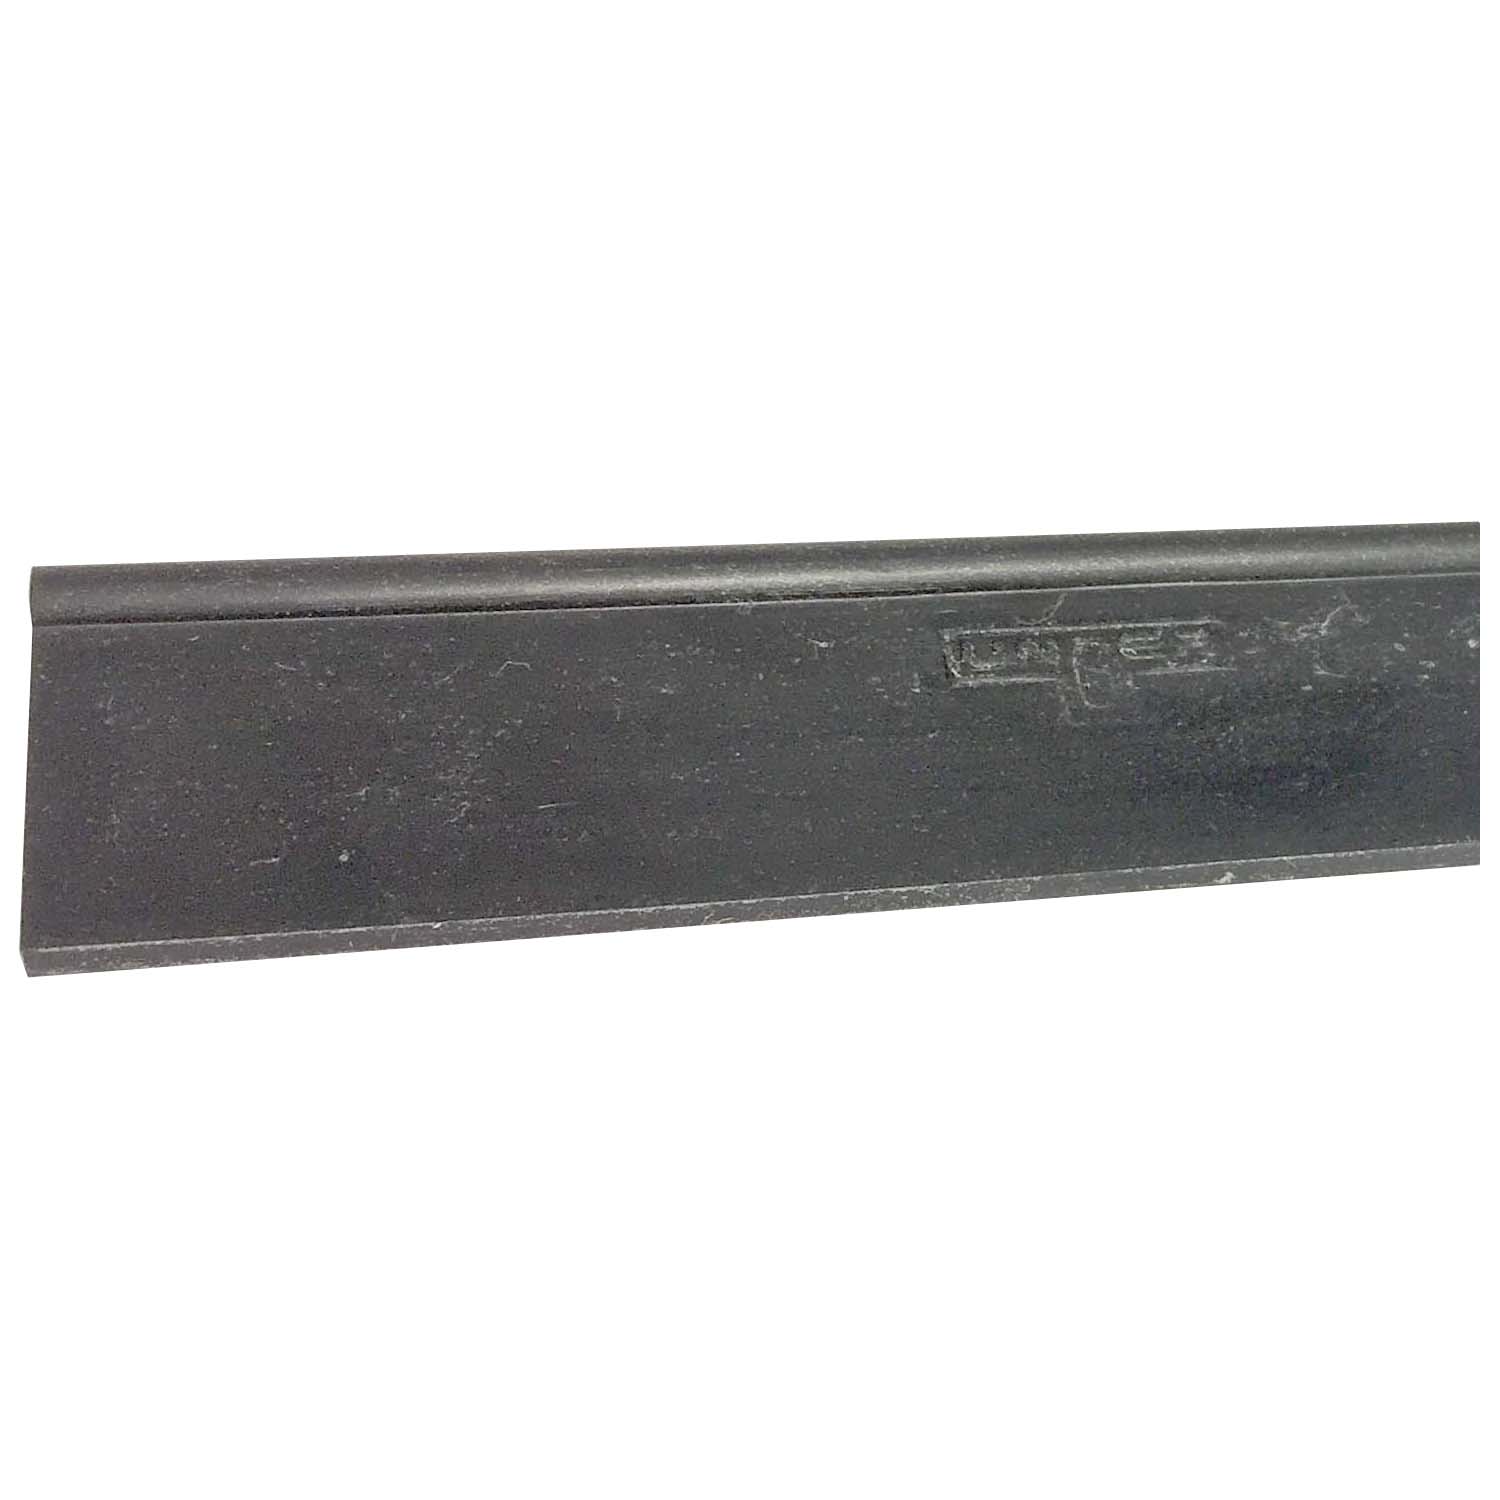 Unger-10-inch-Soft-Rubber